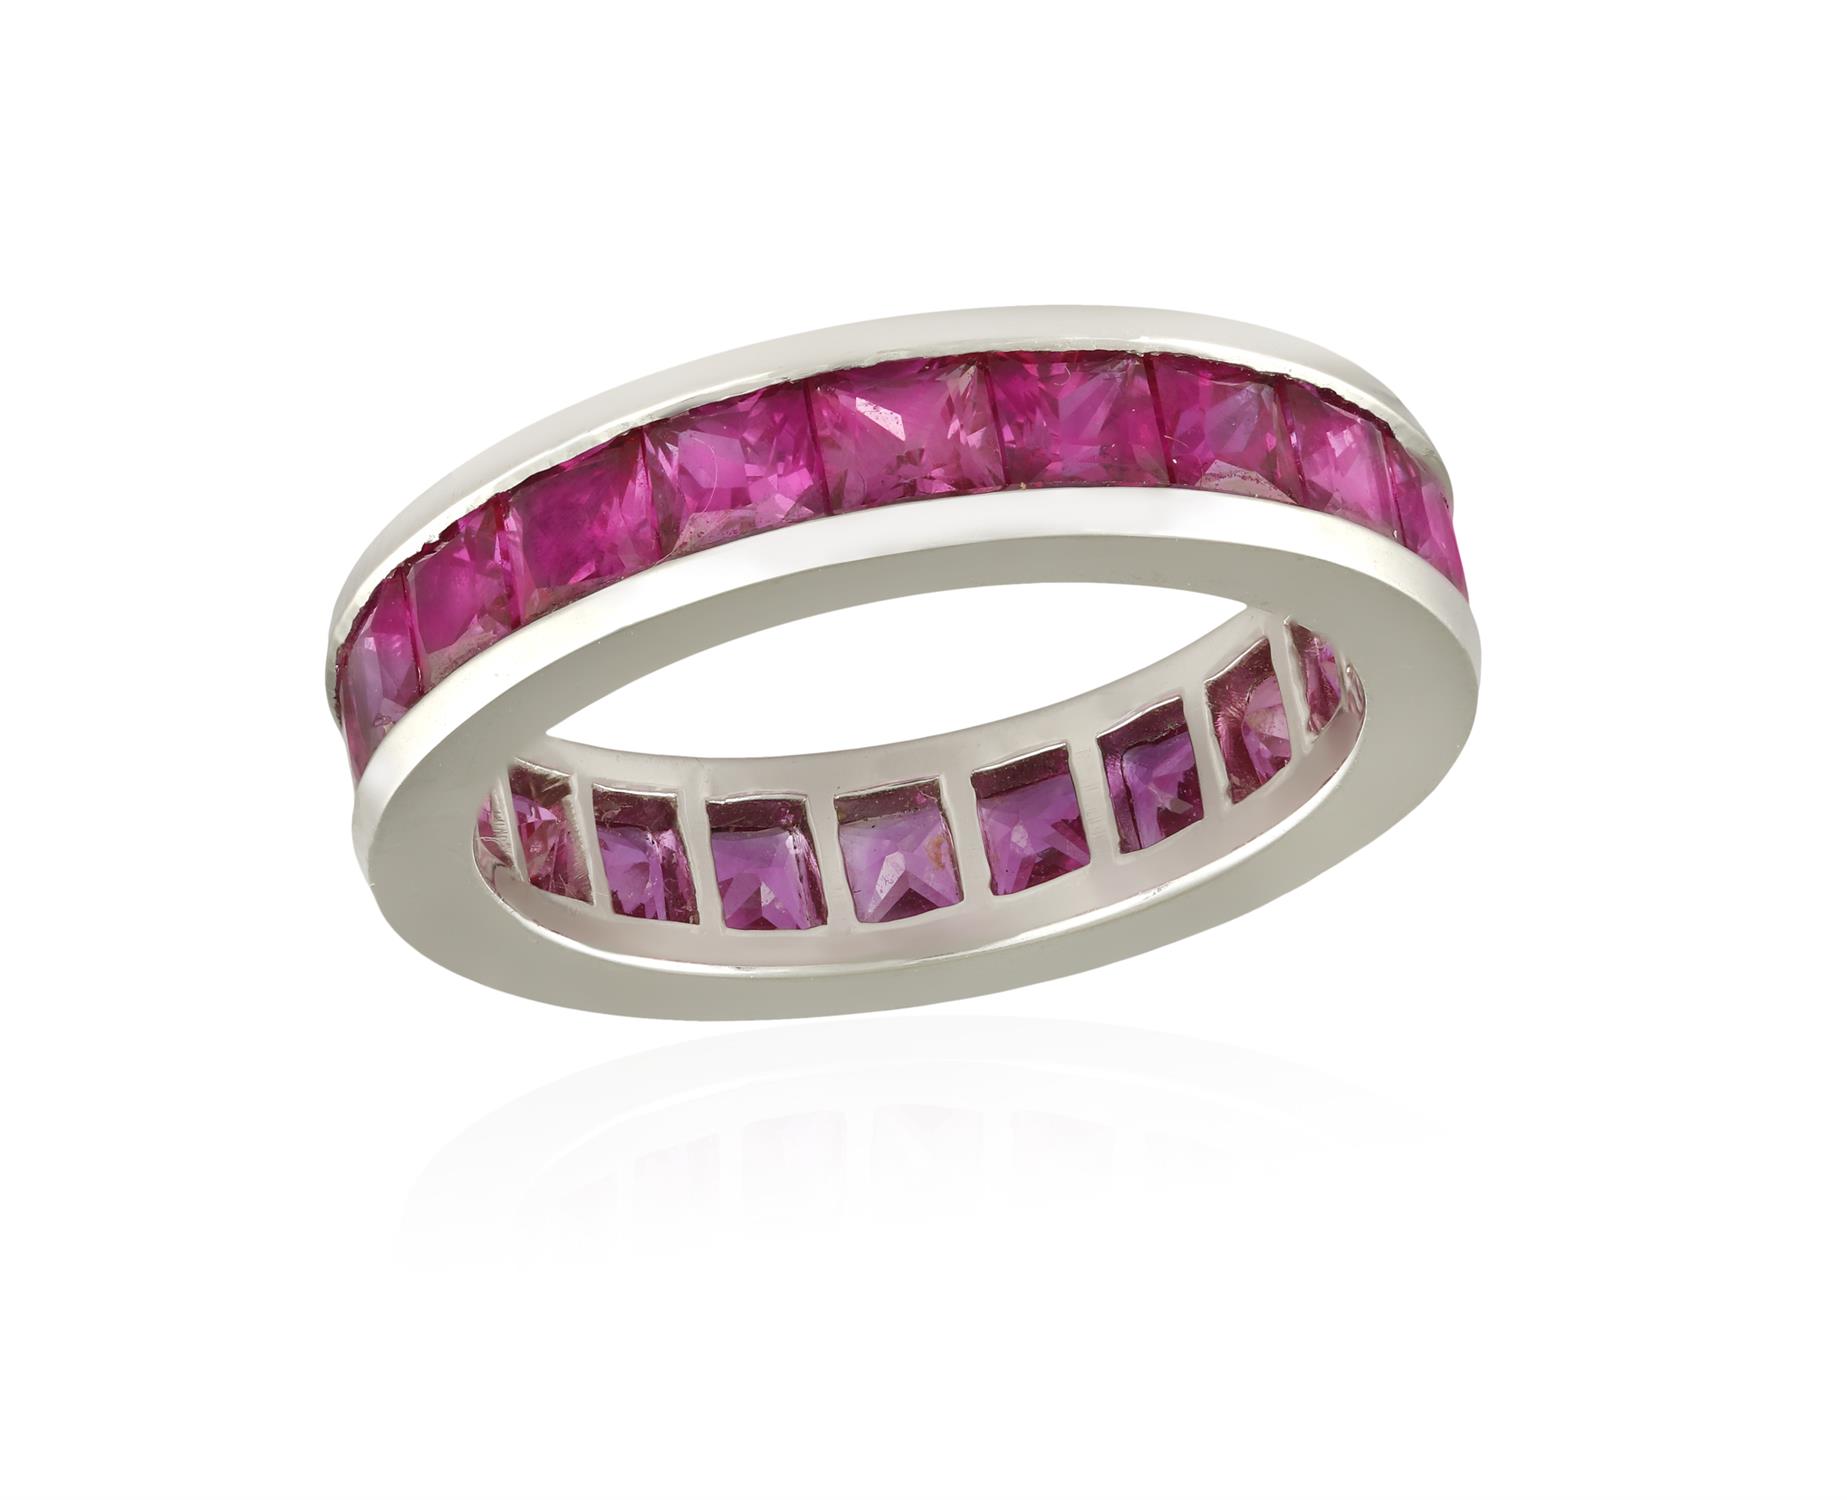 A RUBY ETERNITY RING, BY GRAFF The continuous row of square-cut rubies within channel-setting,